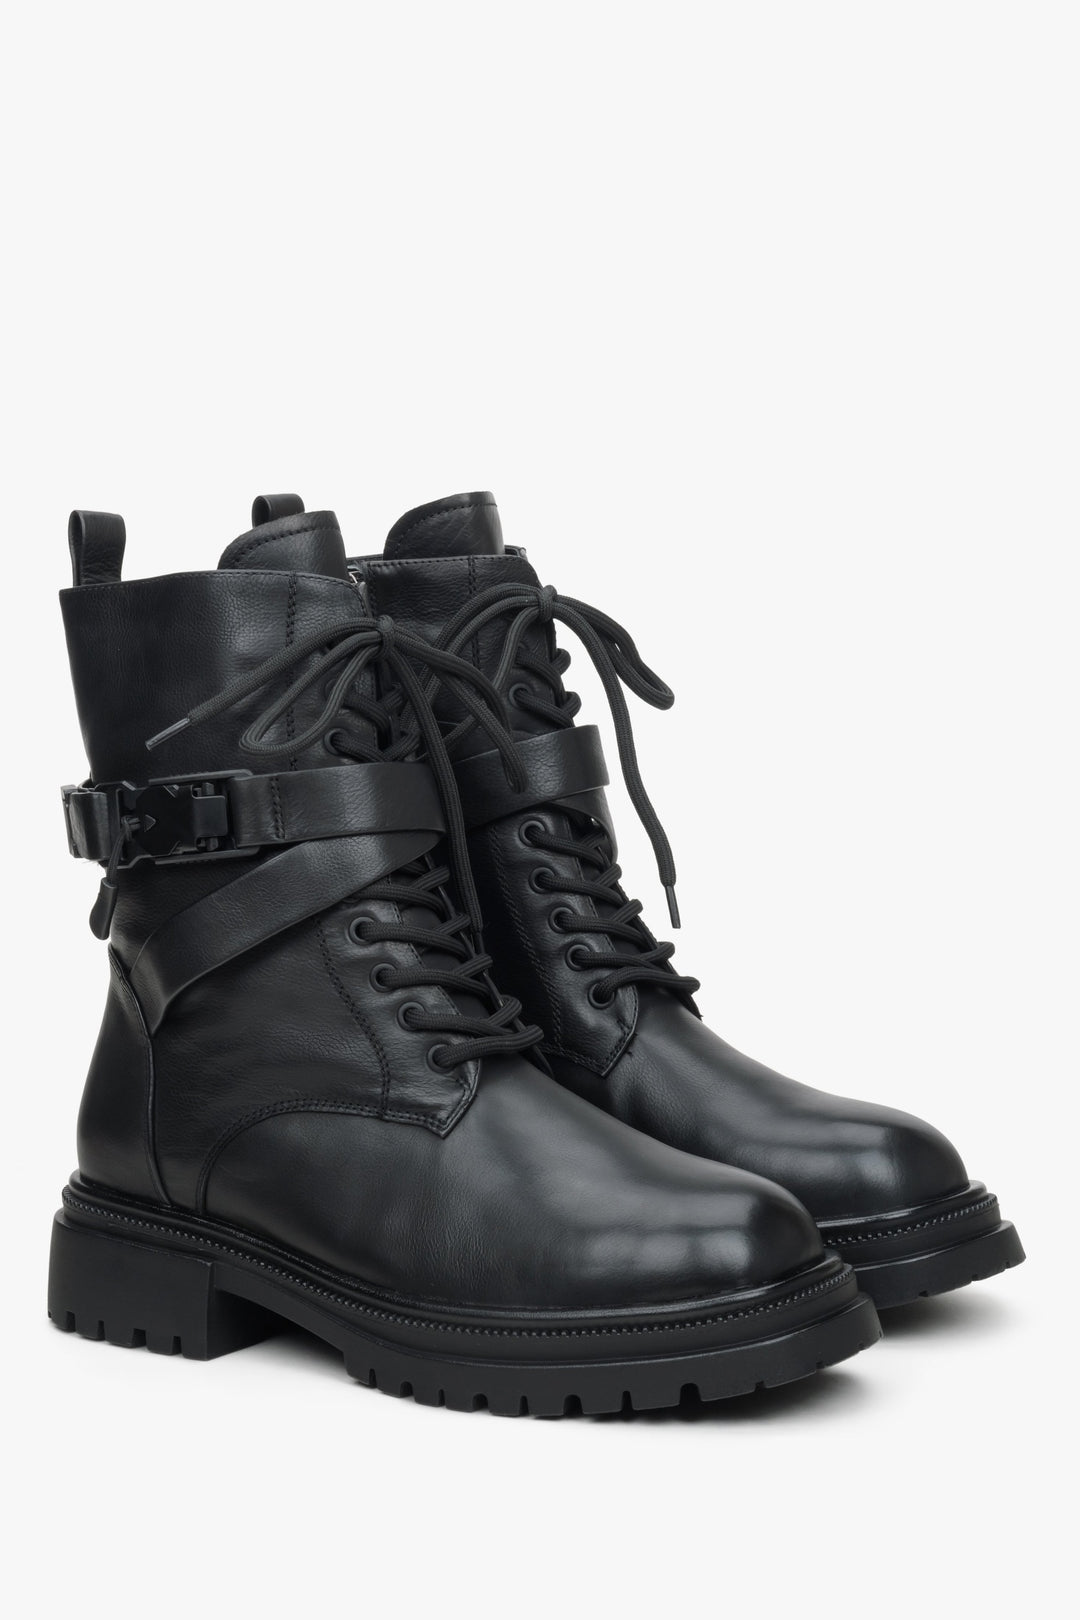 Women's black leather boots with insulation and decorative straps.